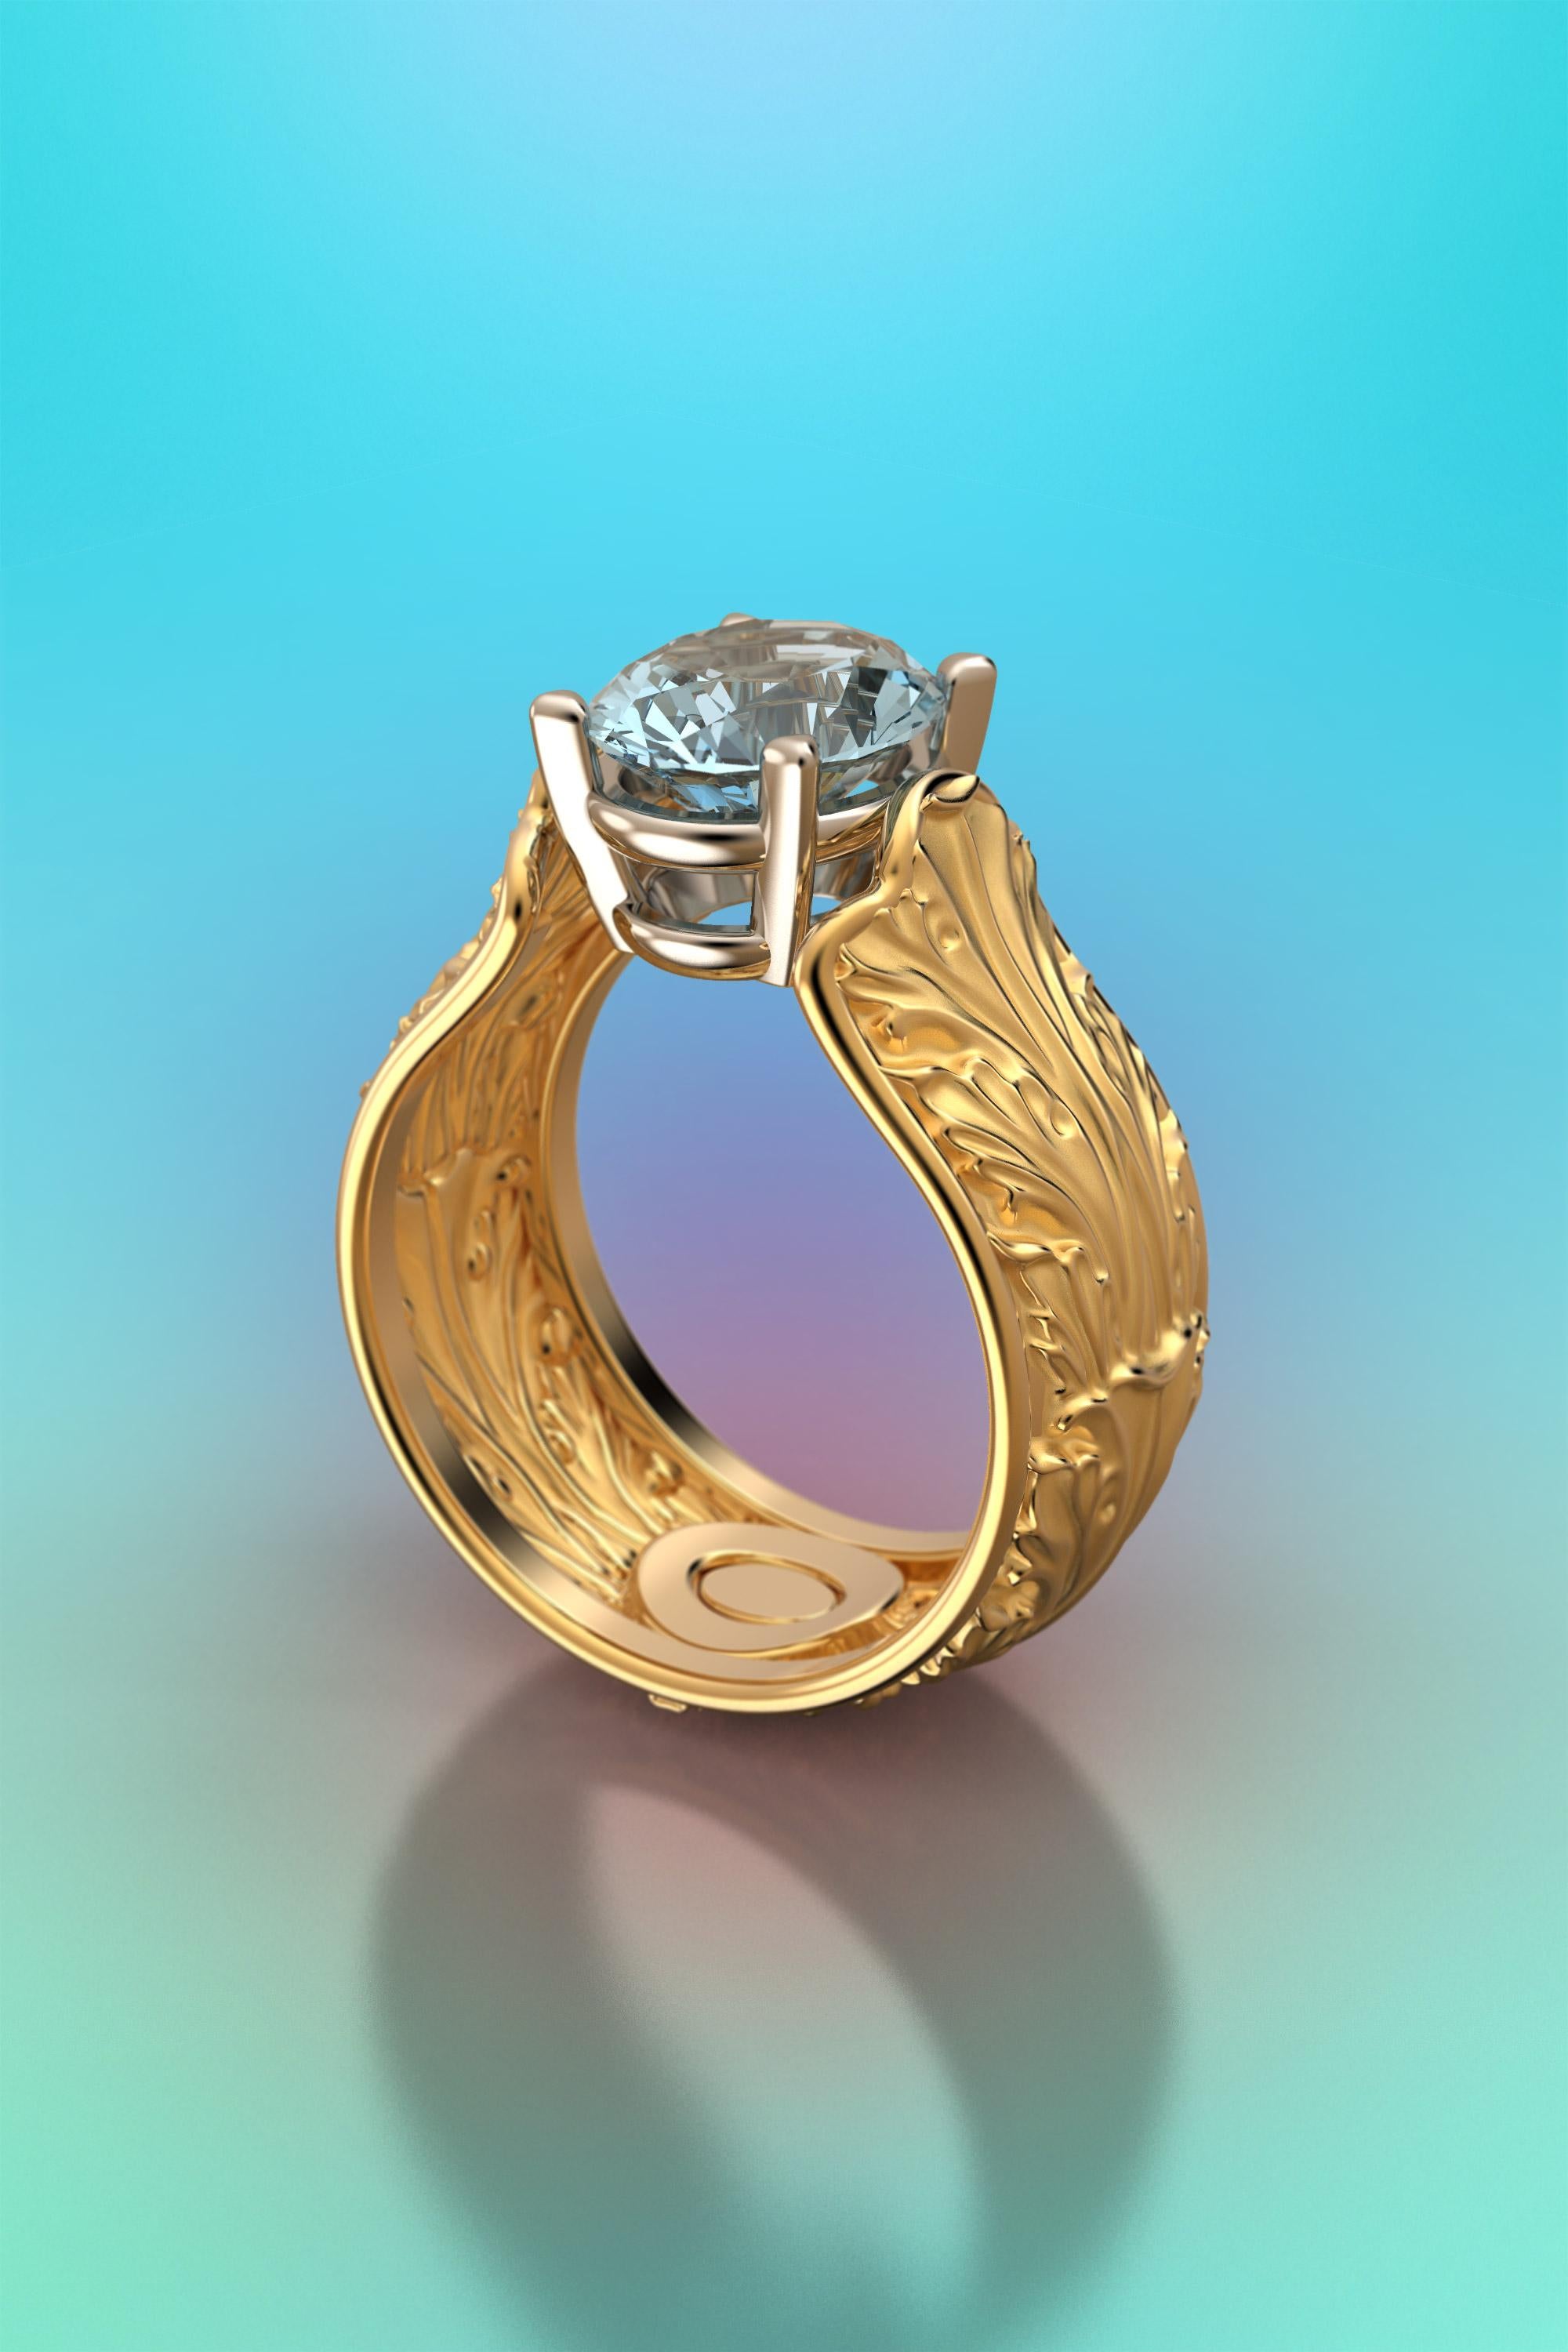 For Sale:  Baroque 18k Gold Ring with Natural Aquamarine Italian Fine Jewelry Made in Italy 3